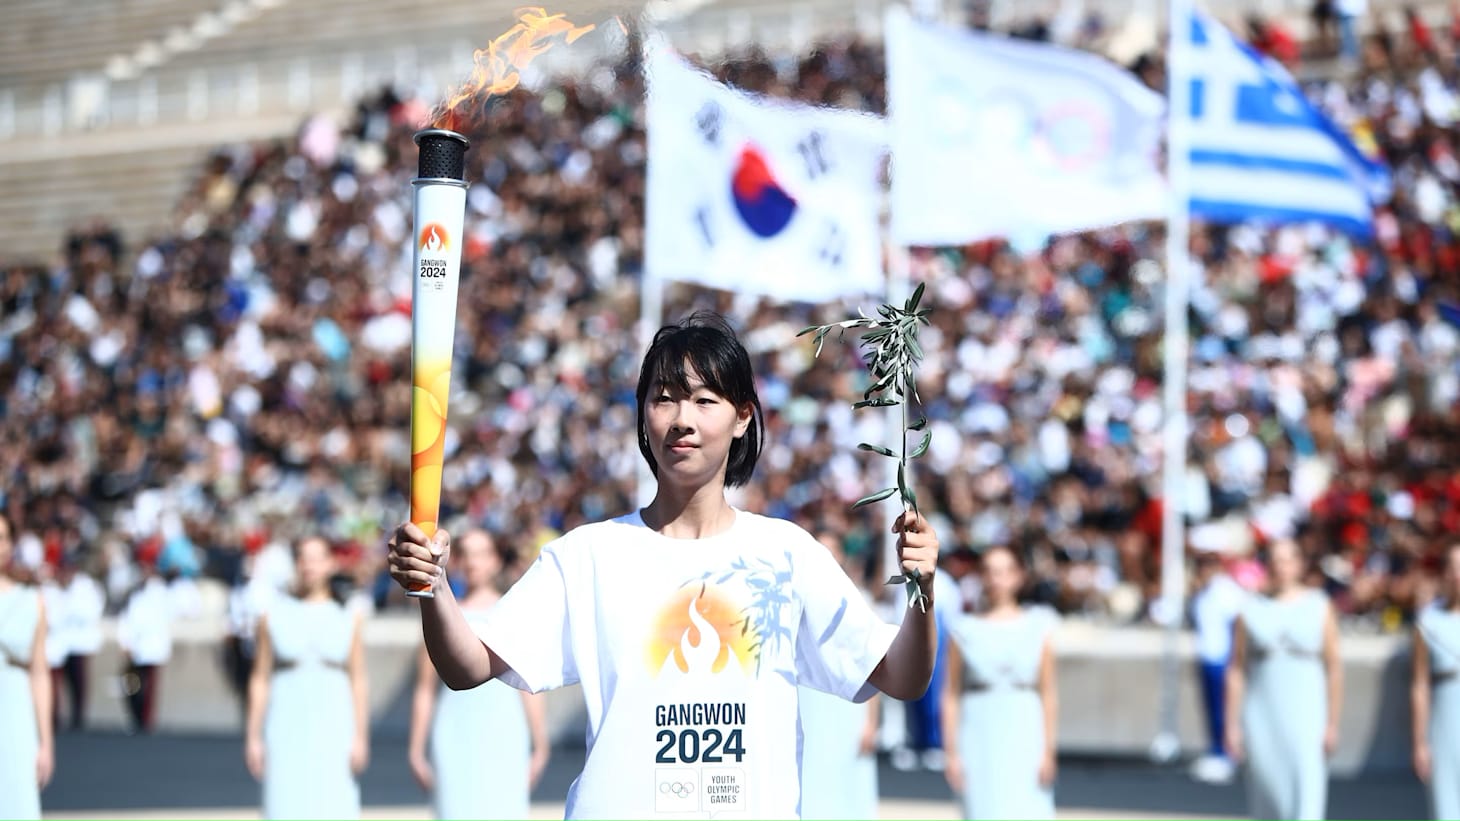 Gangwon 2024 Torch Tour set to light up the Republic of Korea with